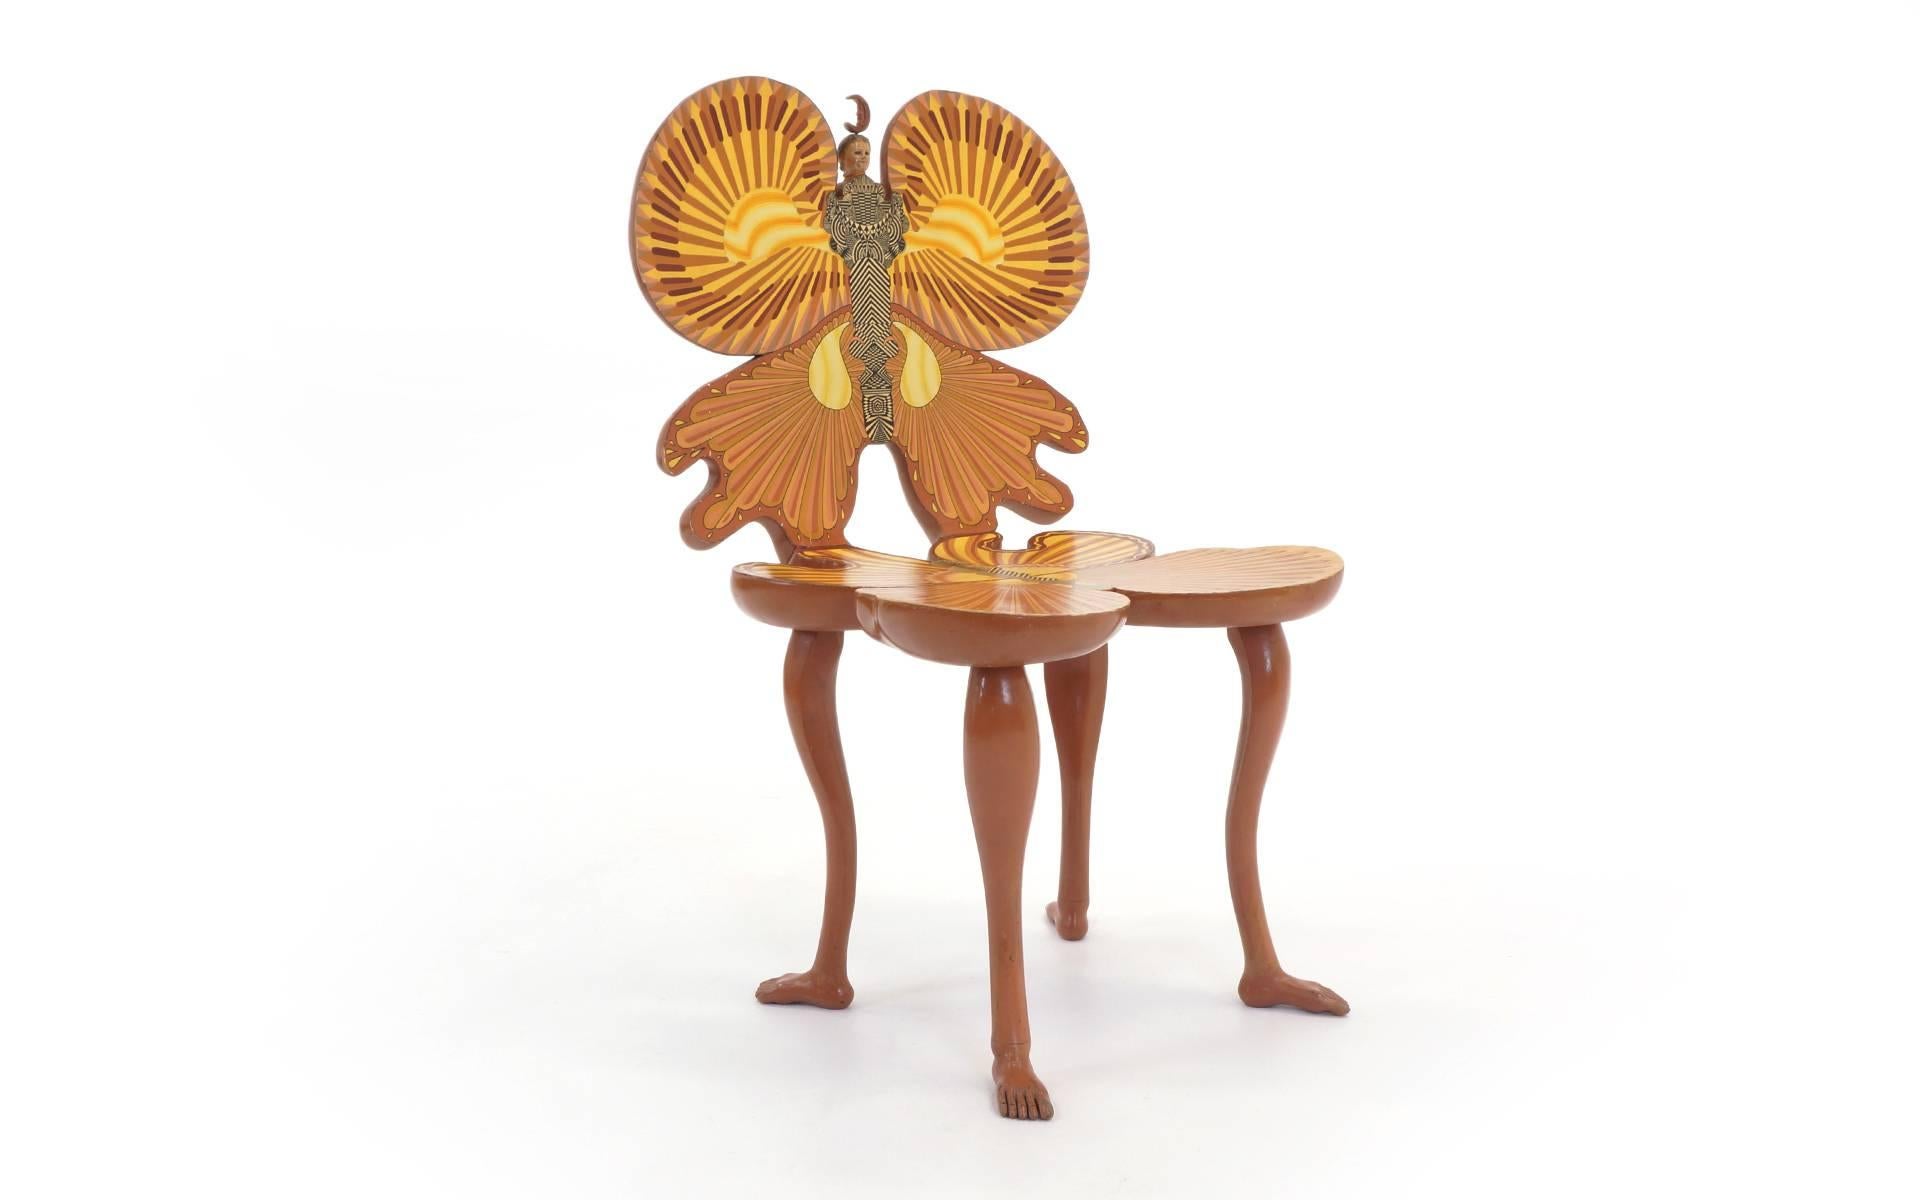 Pedro Friedeberg butterfly chair, 1983, Mexico City. Hand-painted with appropriated ornaments. Signed.